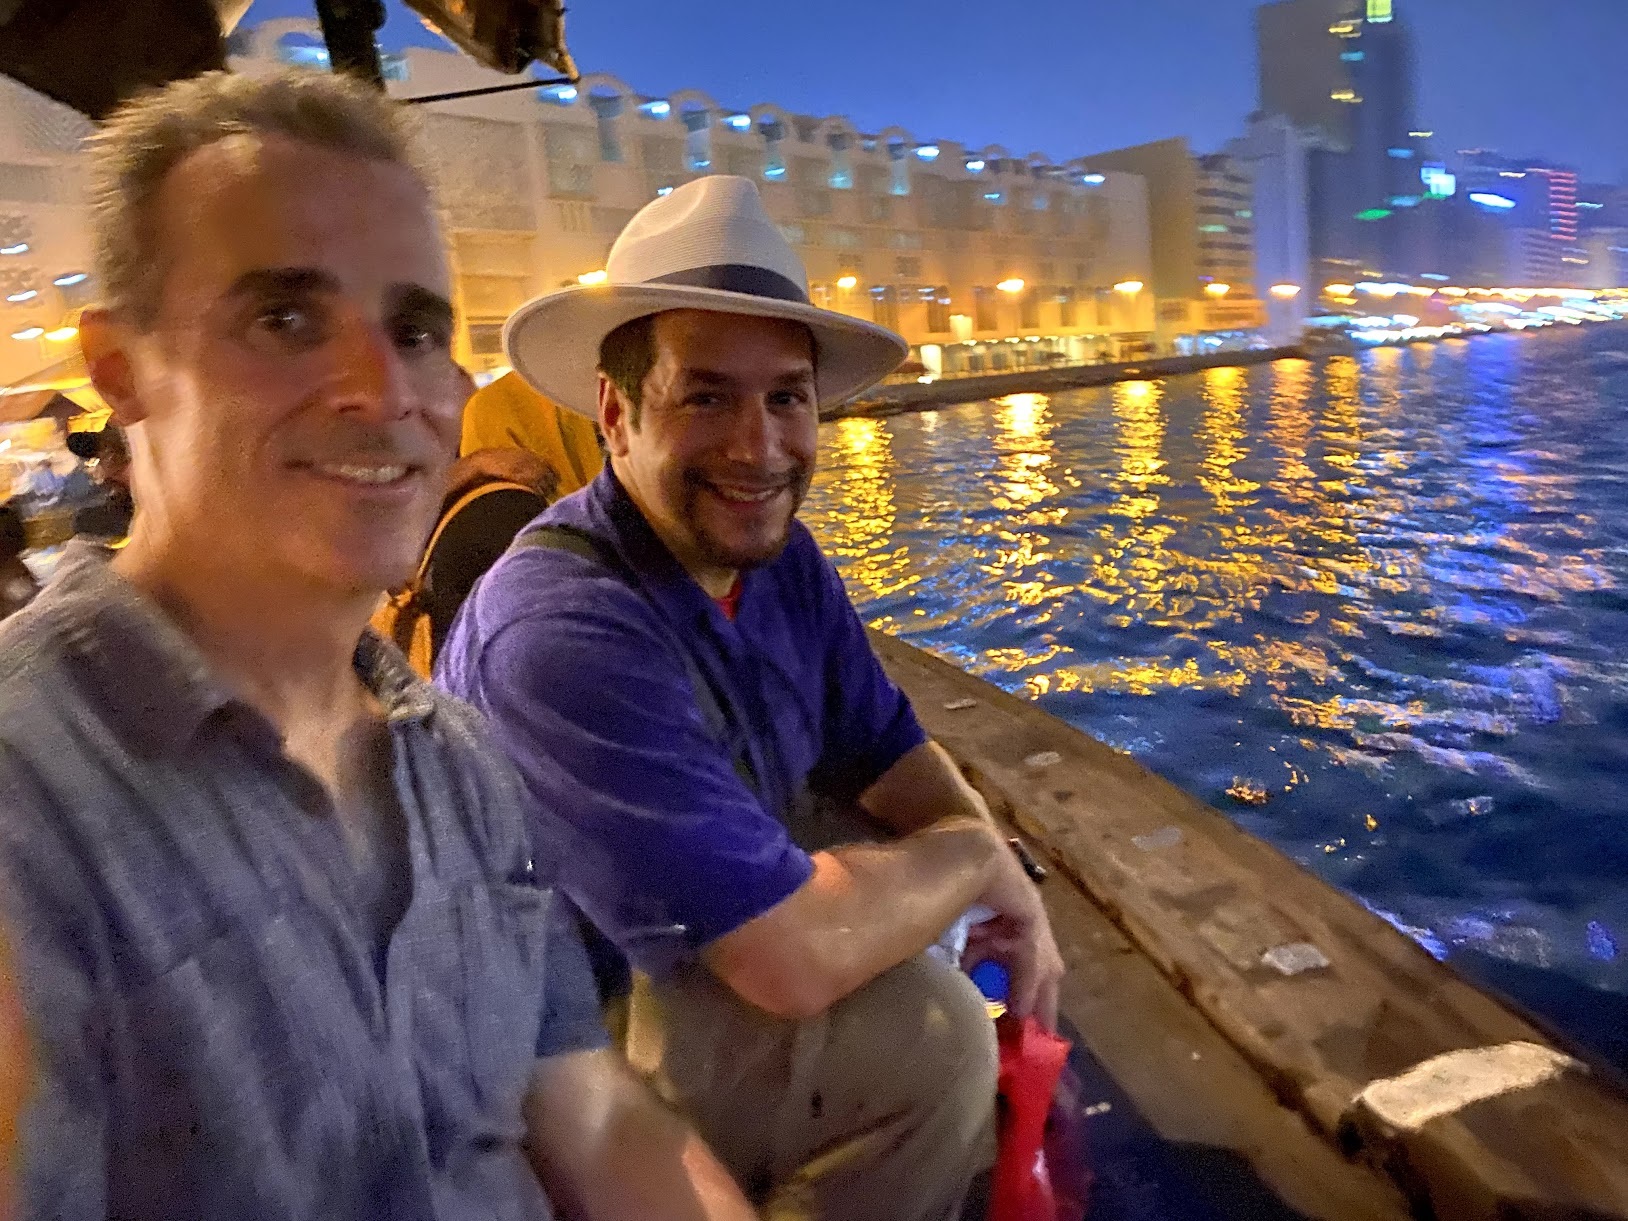 two men sitting on a boat in the water